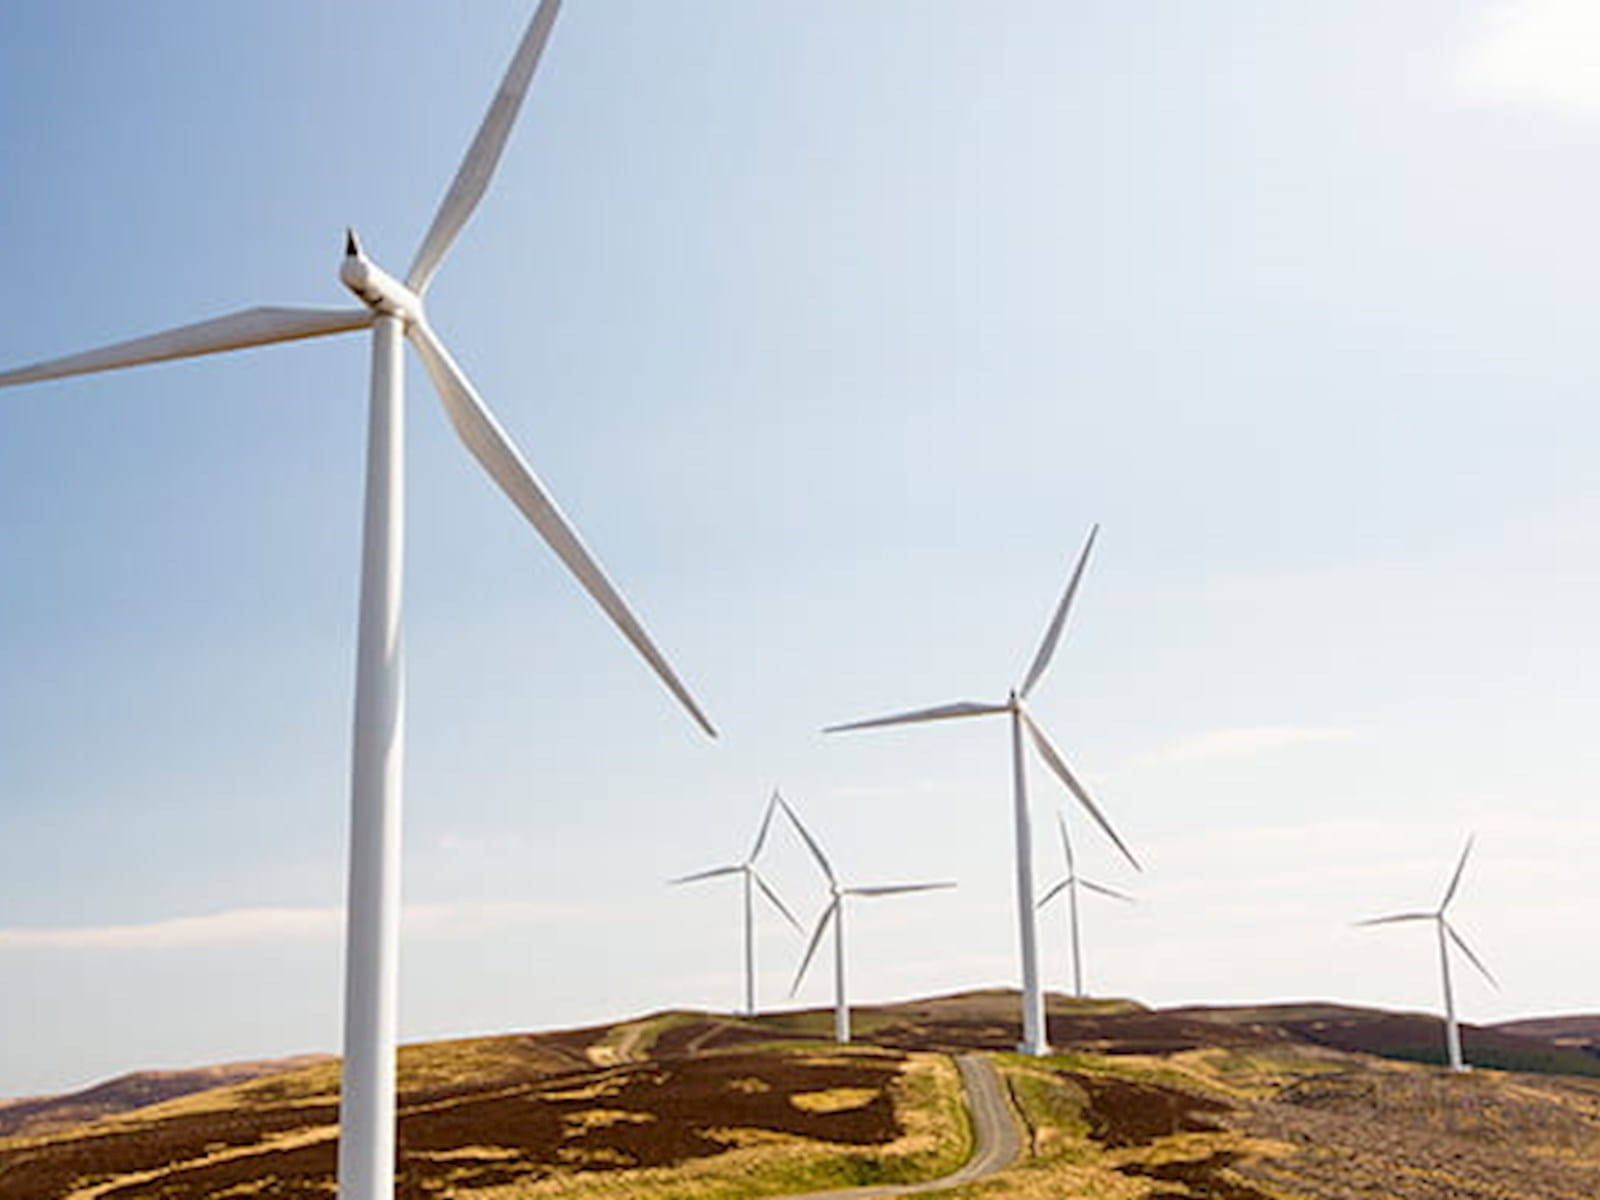 Wind turbines on a hilly landscape